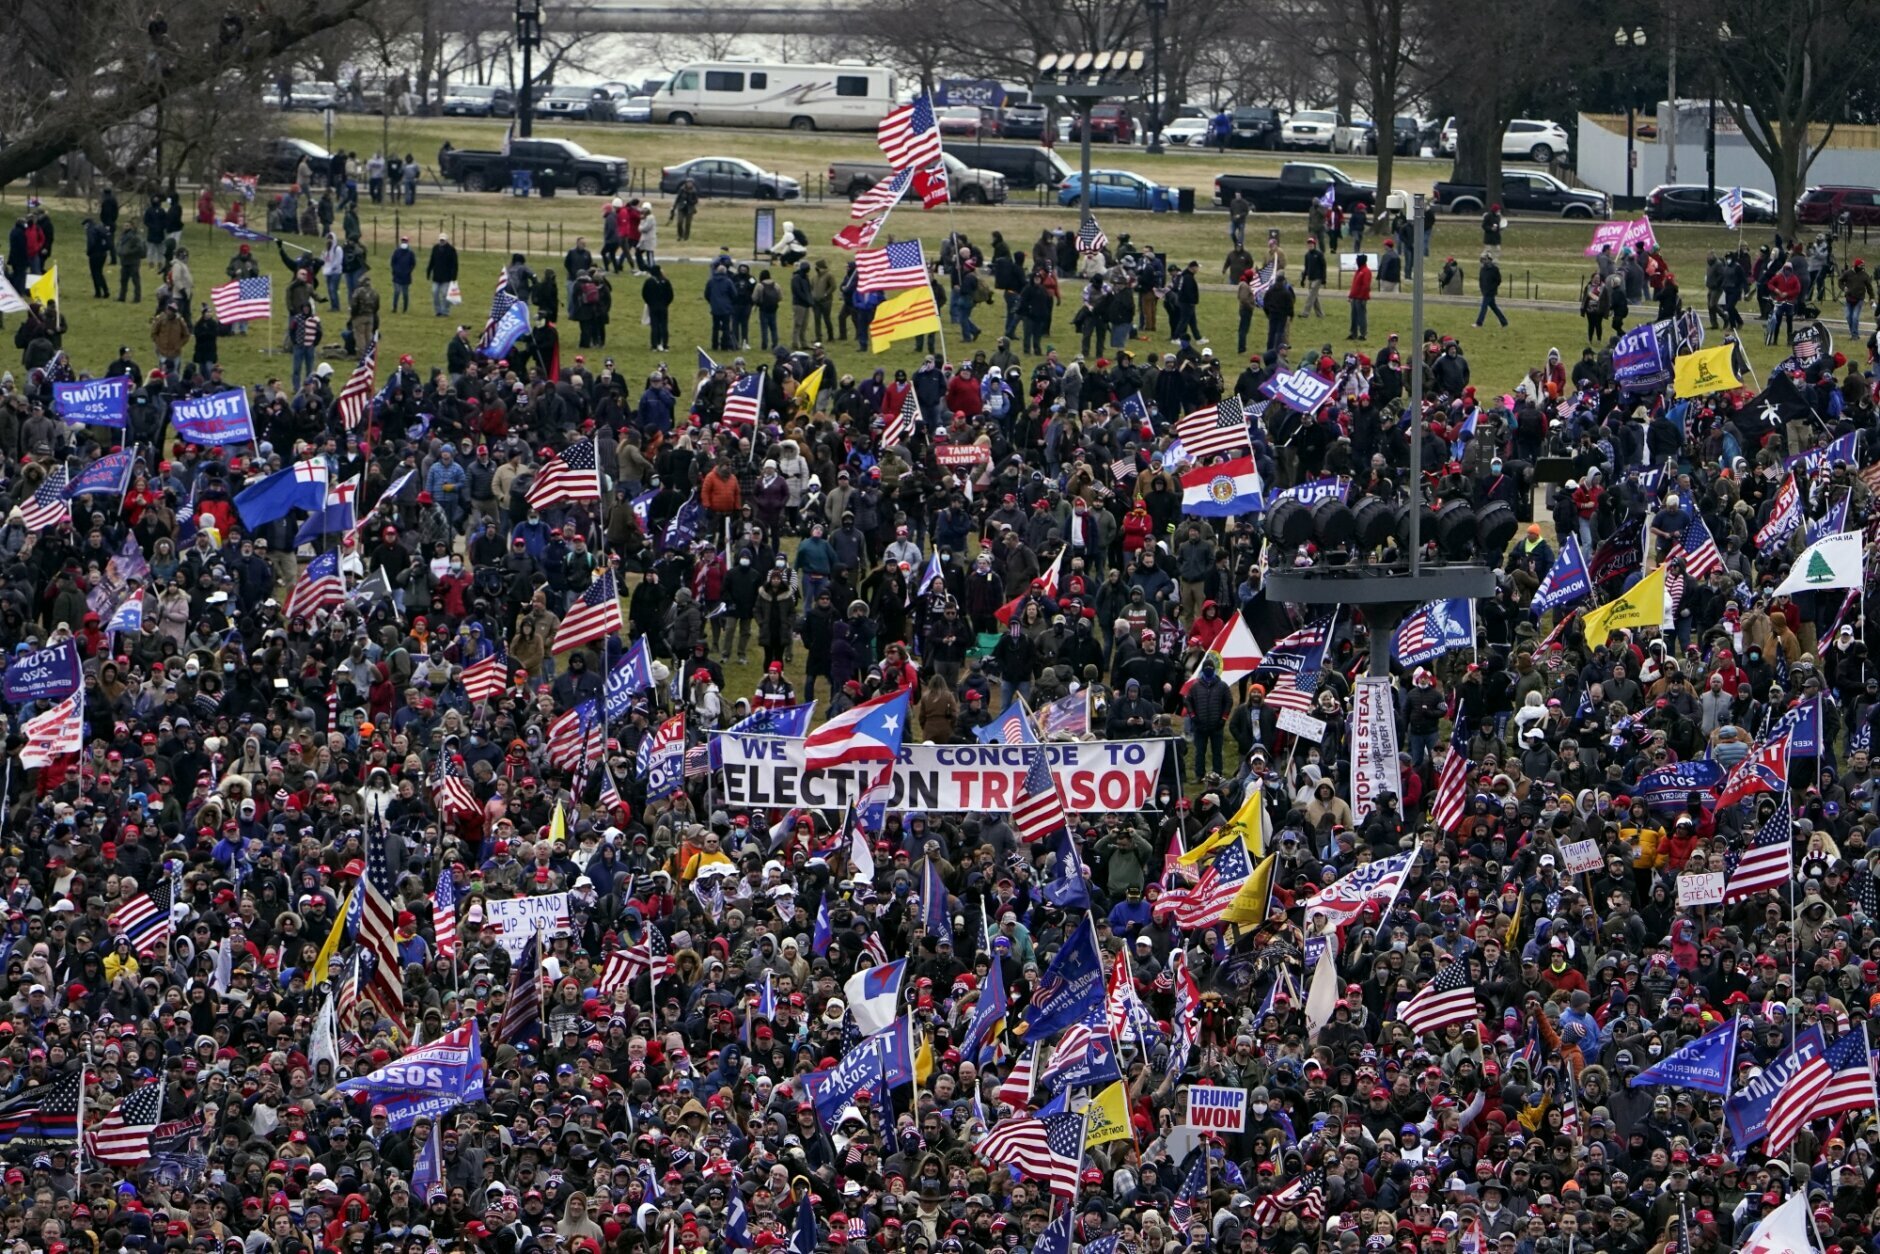 People attend a rally in support of President Donald Trump on Wednesday, Jan. 6, 2021, in Washington. (AP Photo/Jacquelyn Martin)